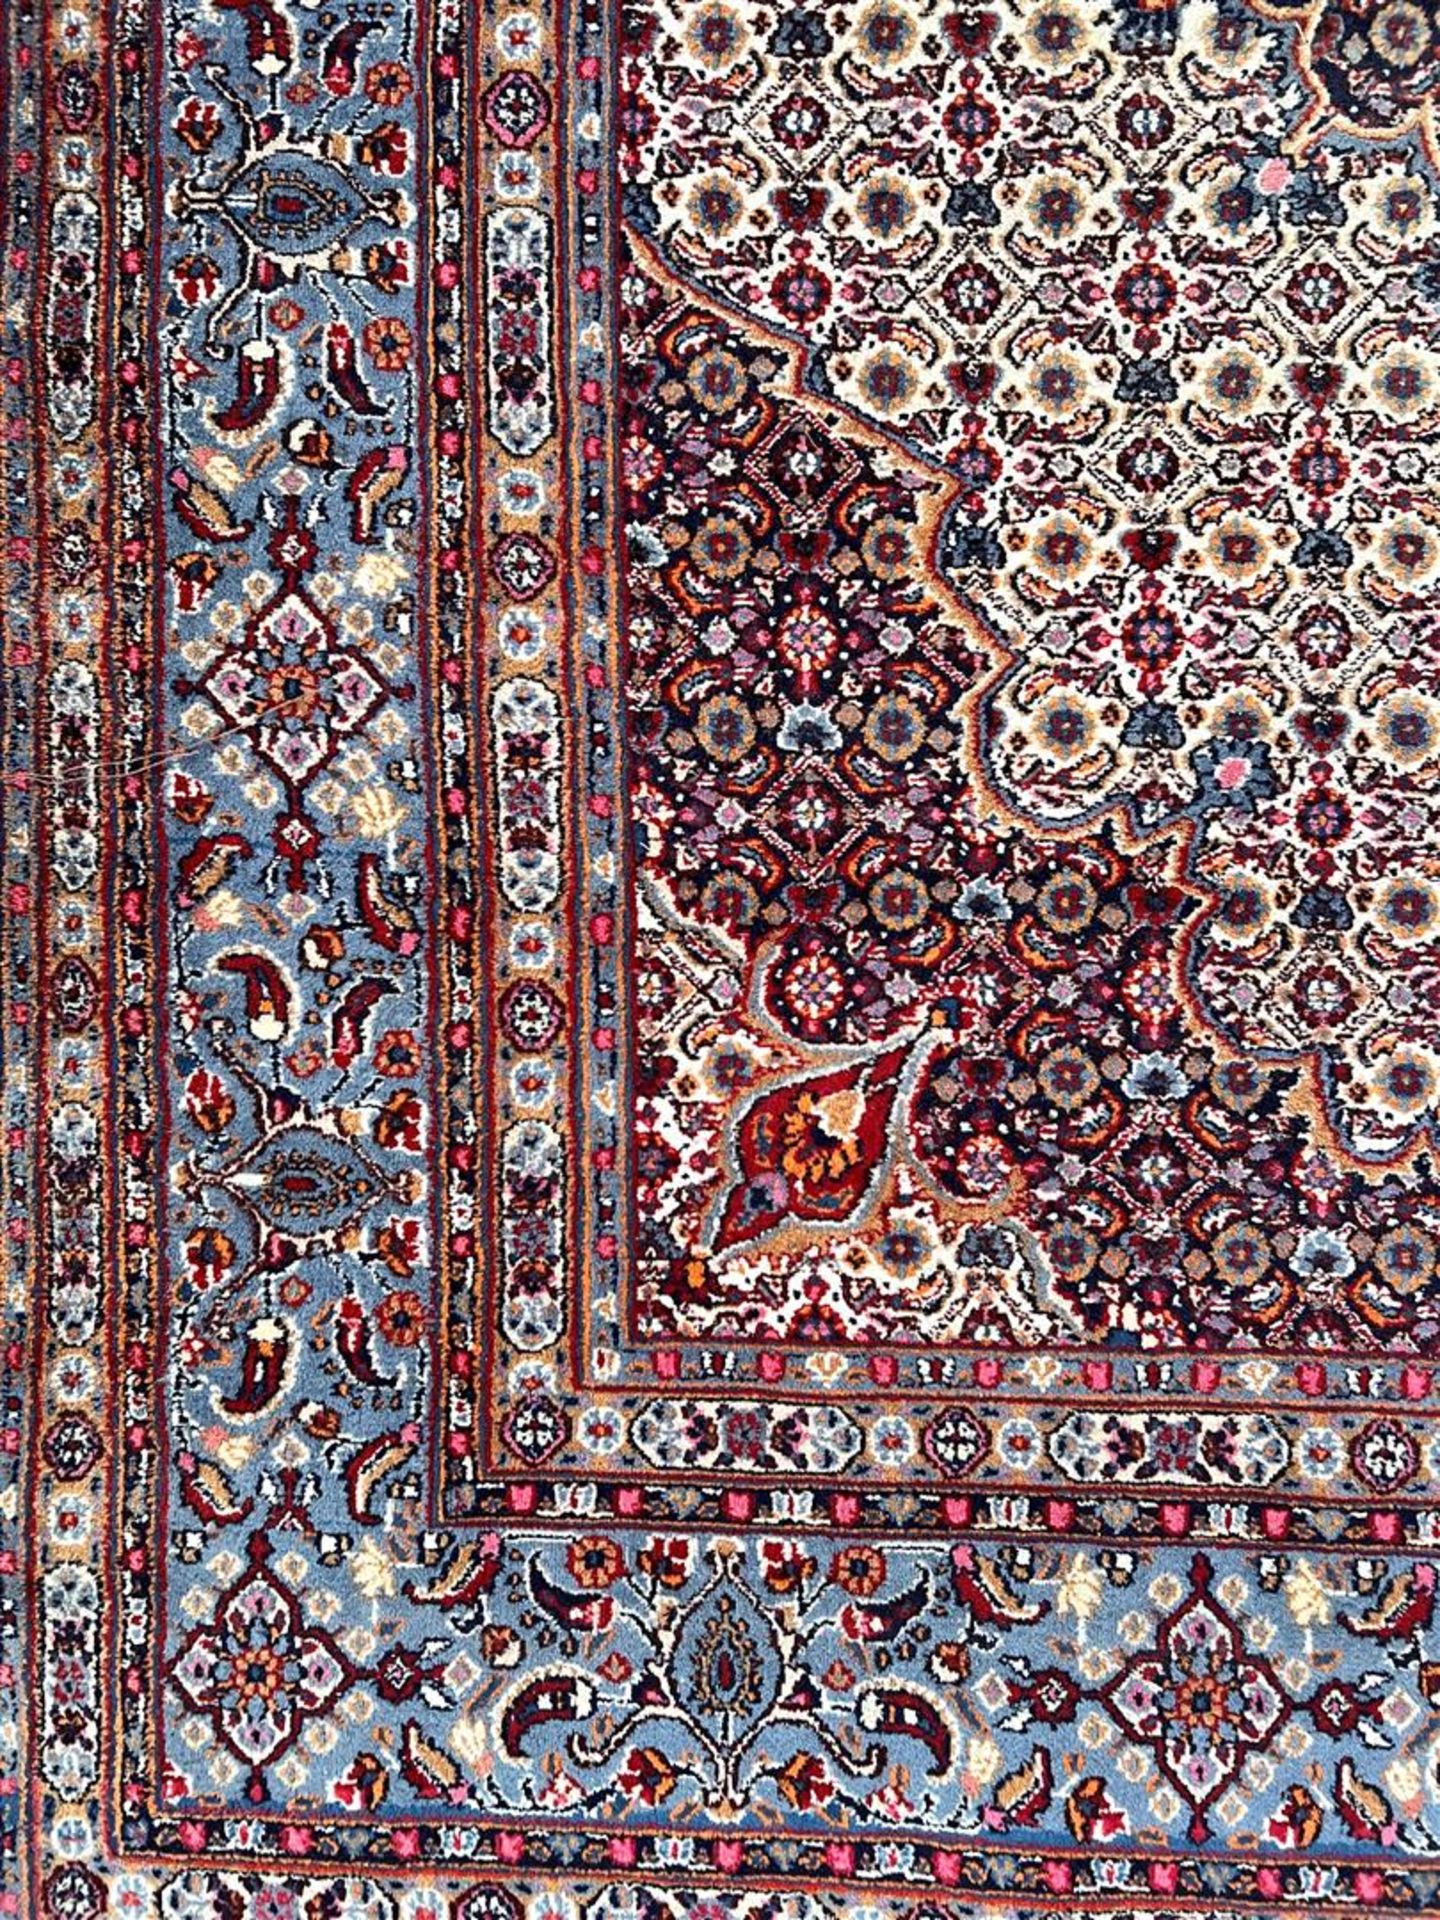 Hand-knotted wool carpet with oriental decor - Image 2 of 3